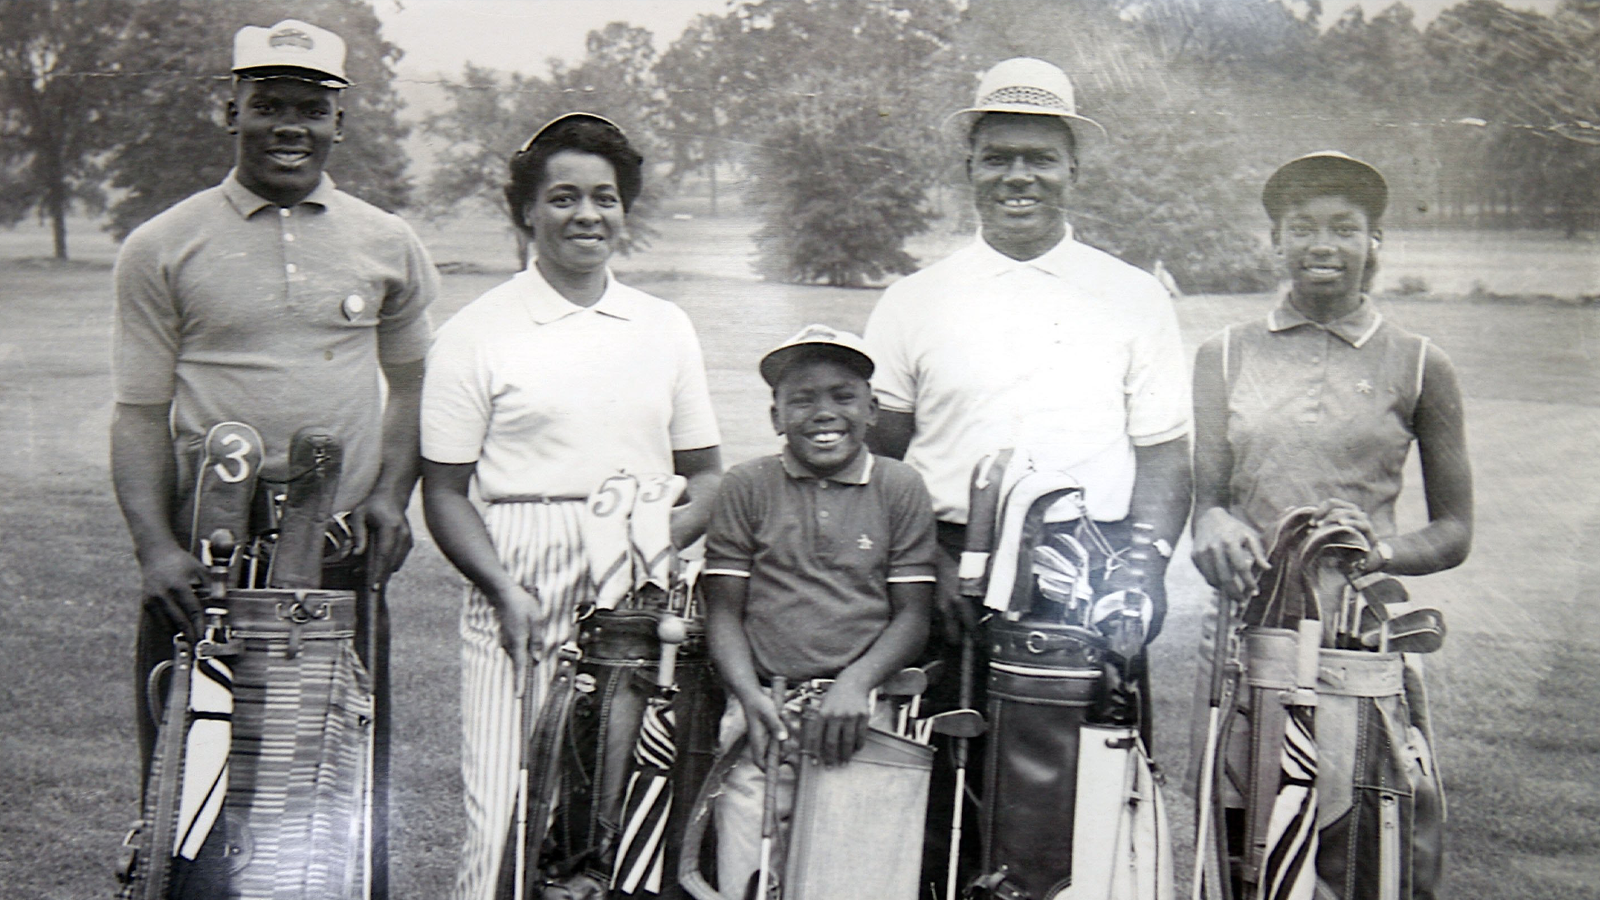 The Powell Family: Billy Powell, Marcella Powell, Larry Powell, William Powell and Renee Powell of East Canton, Ohio at Clearview Golf Club.